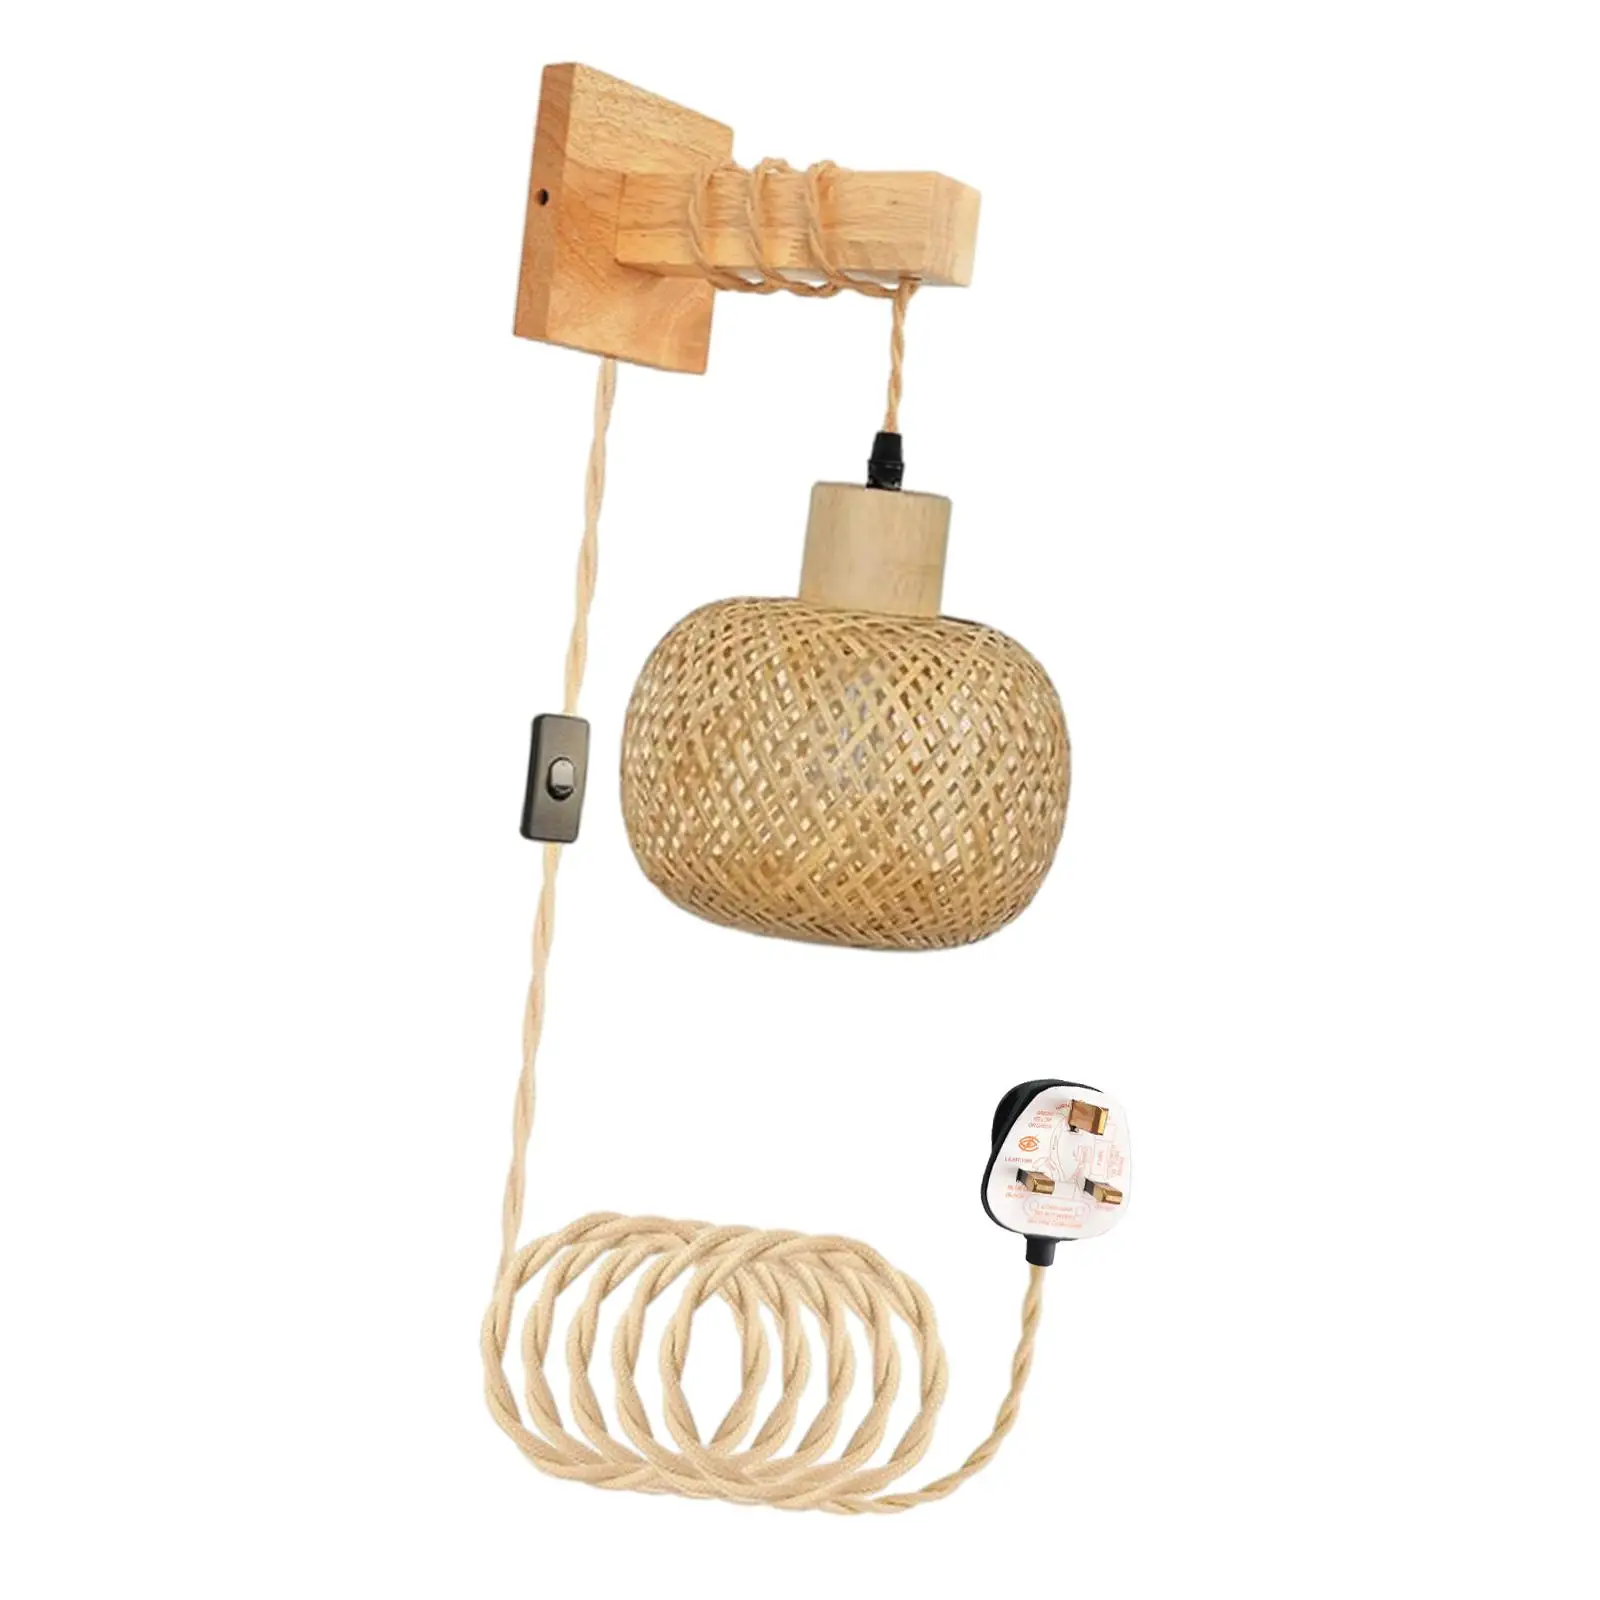 Bamboo Wall Sconce E26 Base Wall Mount Sconce Hand Woven Farmhouse Hanging Lamp for Bedroom Corridor Bathroom Kitchen Stairs